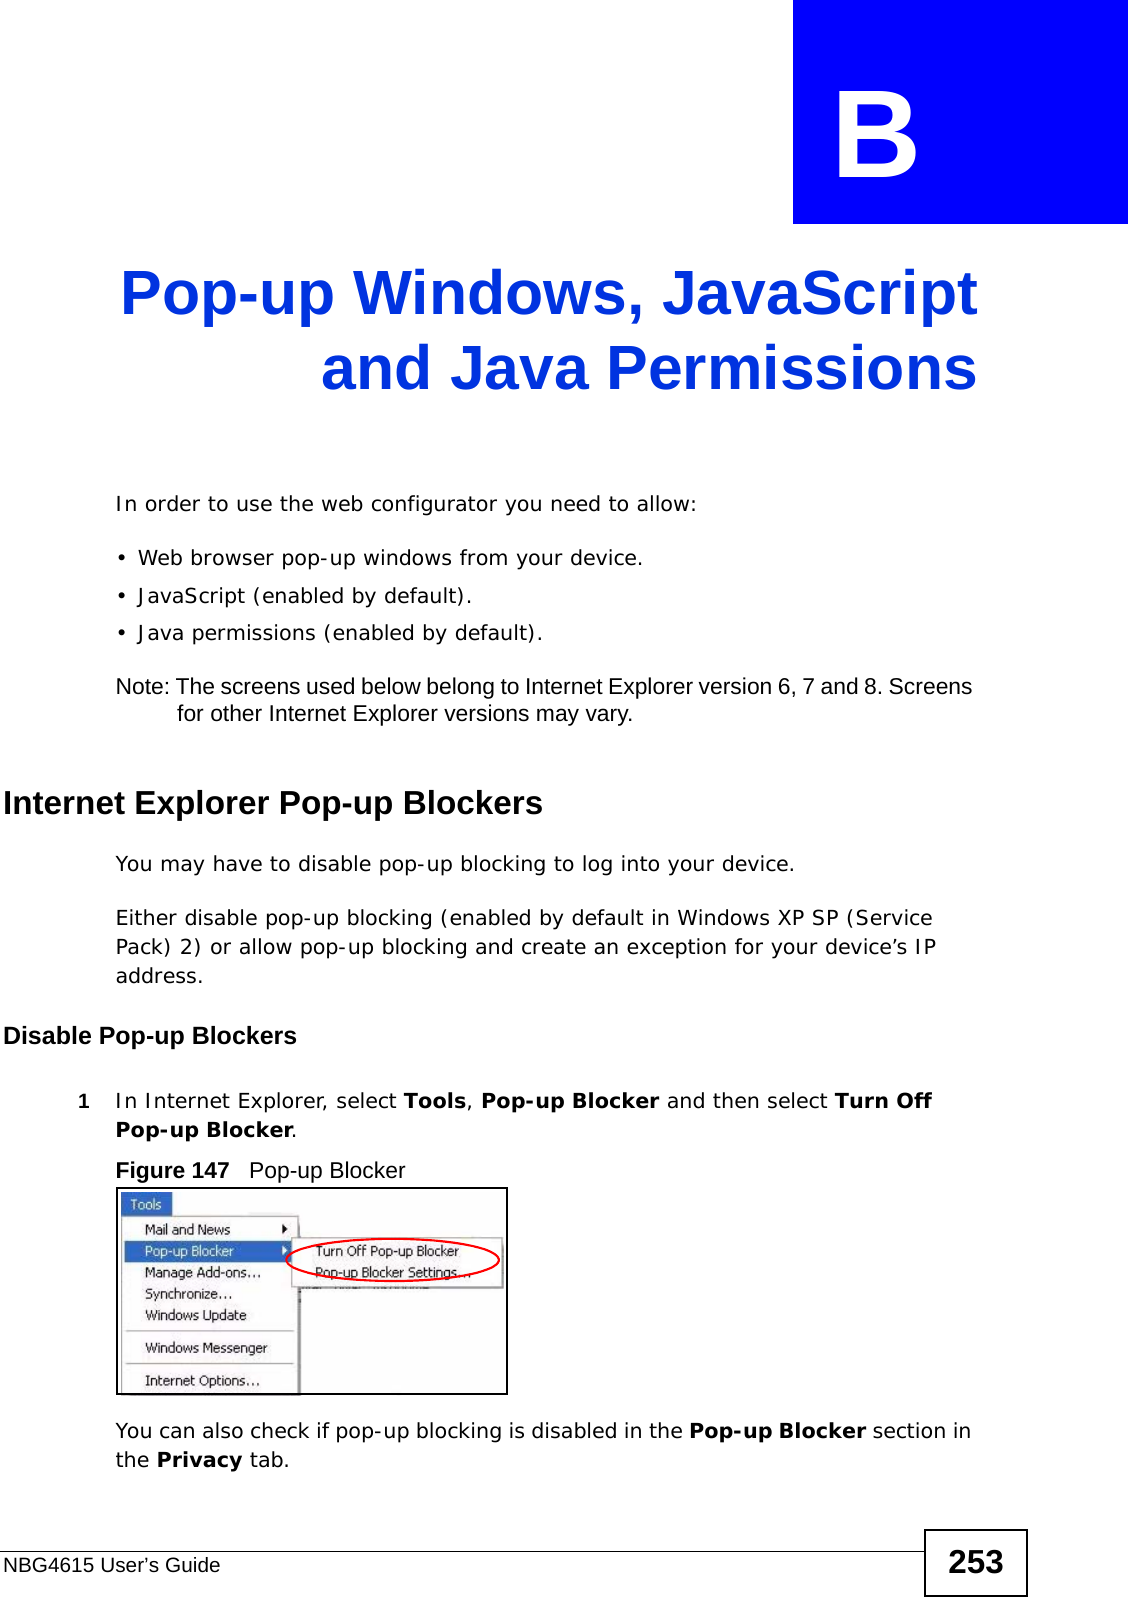 NBG4615 User’s Guide 253APPENDIX  B Pop-up Windows, JavaScriptand Java PermissionsIn order to use the web configurator you need to allow:• Web browser pop-up windows from your device.• JavaScript (enabled by default).• Java permissions (enabled by default).Note: The screens used below belong to Internet Explorer version 6, 7 and 8. Screens for other Internet Explorer versions may vary.Internet Explorer Pop-up BlockersYou may have to disable pop-up blocking to log into your device. Either disable pop-up blocking (enabled by default in Windows XP SP (Service Pack) 2) or allow pop-up blocking and create an exception for your device’s IP address.Disable Pop-up Blockers1In Internet Explorer, select Tools, Pop-up Blocker and then select Turn Off Pop-up Blocker. Figure 147   Pop-up BlockerYou can also check if pop-up blocking is disabled in the Pop-up Blocker section in the Privacy tab. 